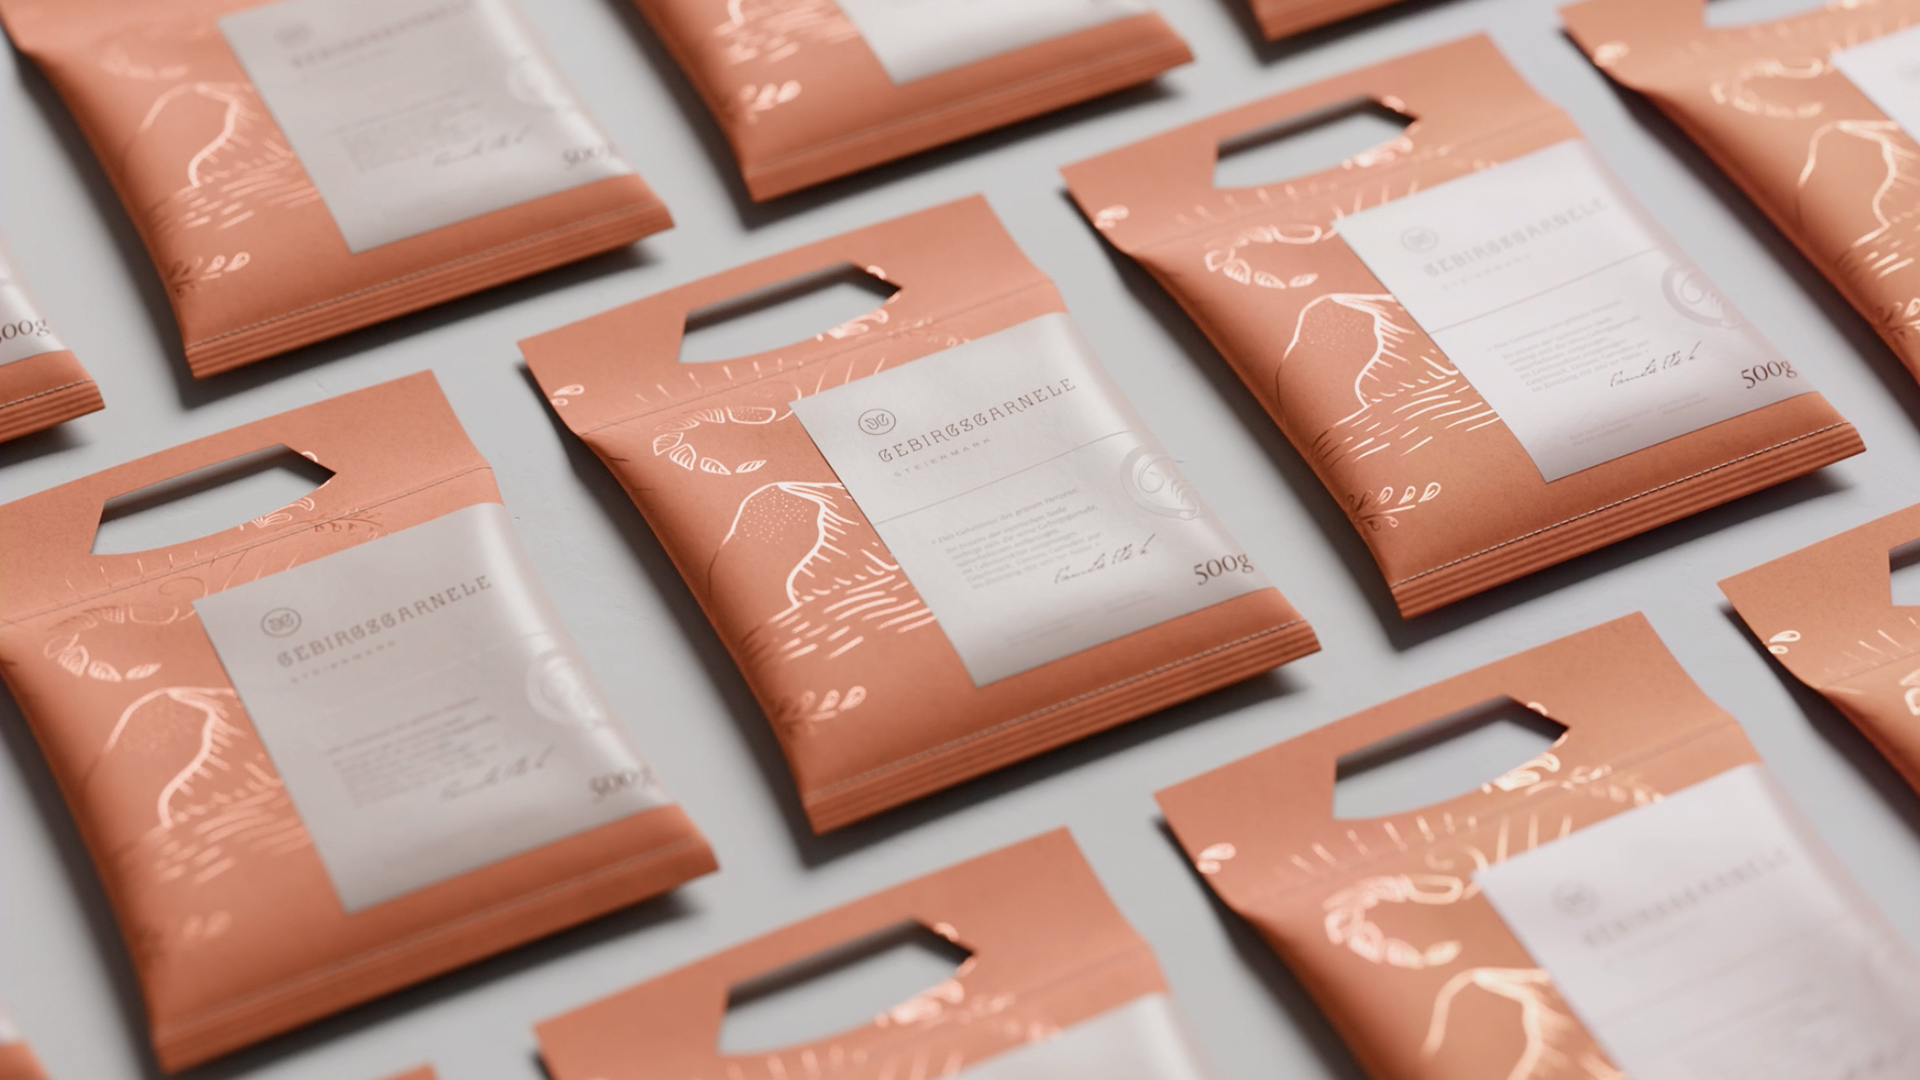 Packaging Design Concept for The Mountain Shrimp Created by Studio HEED